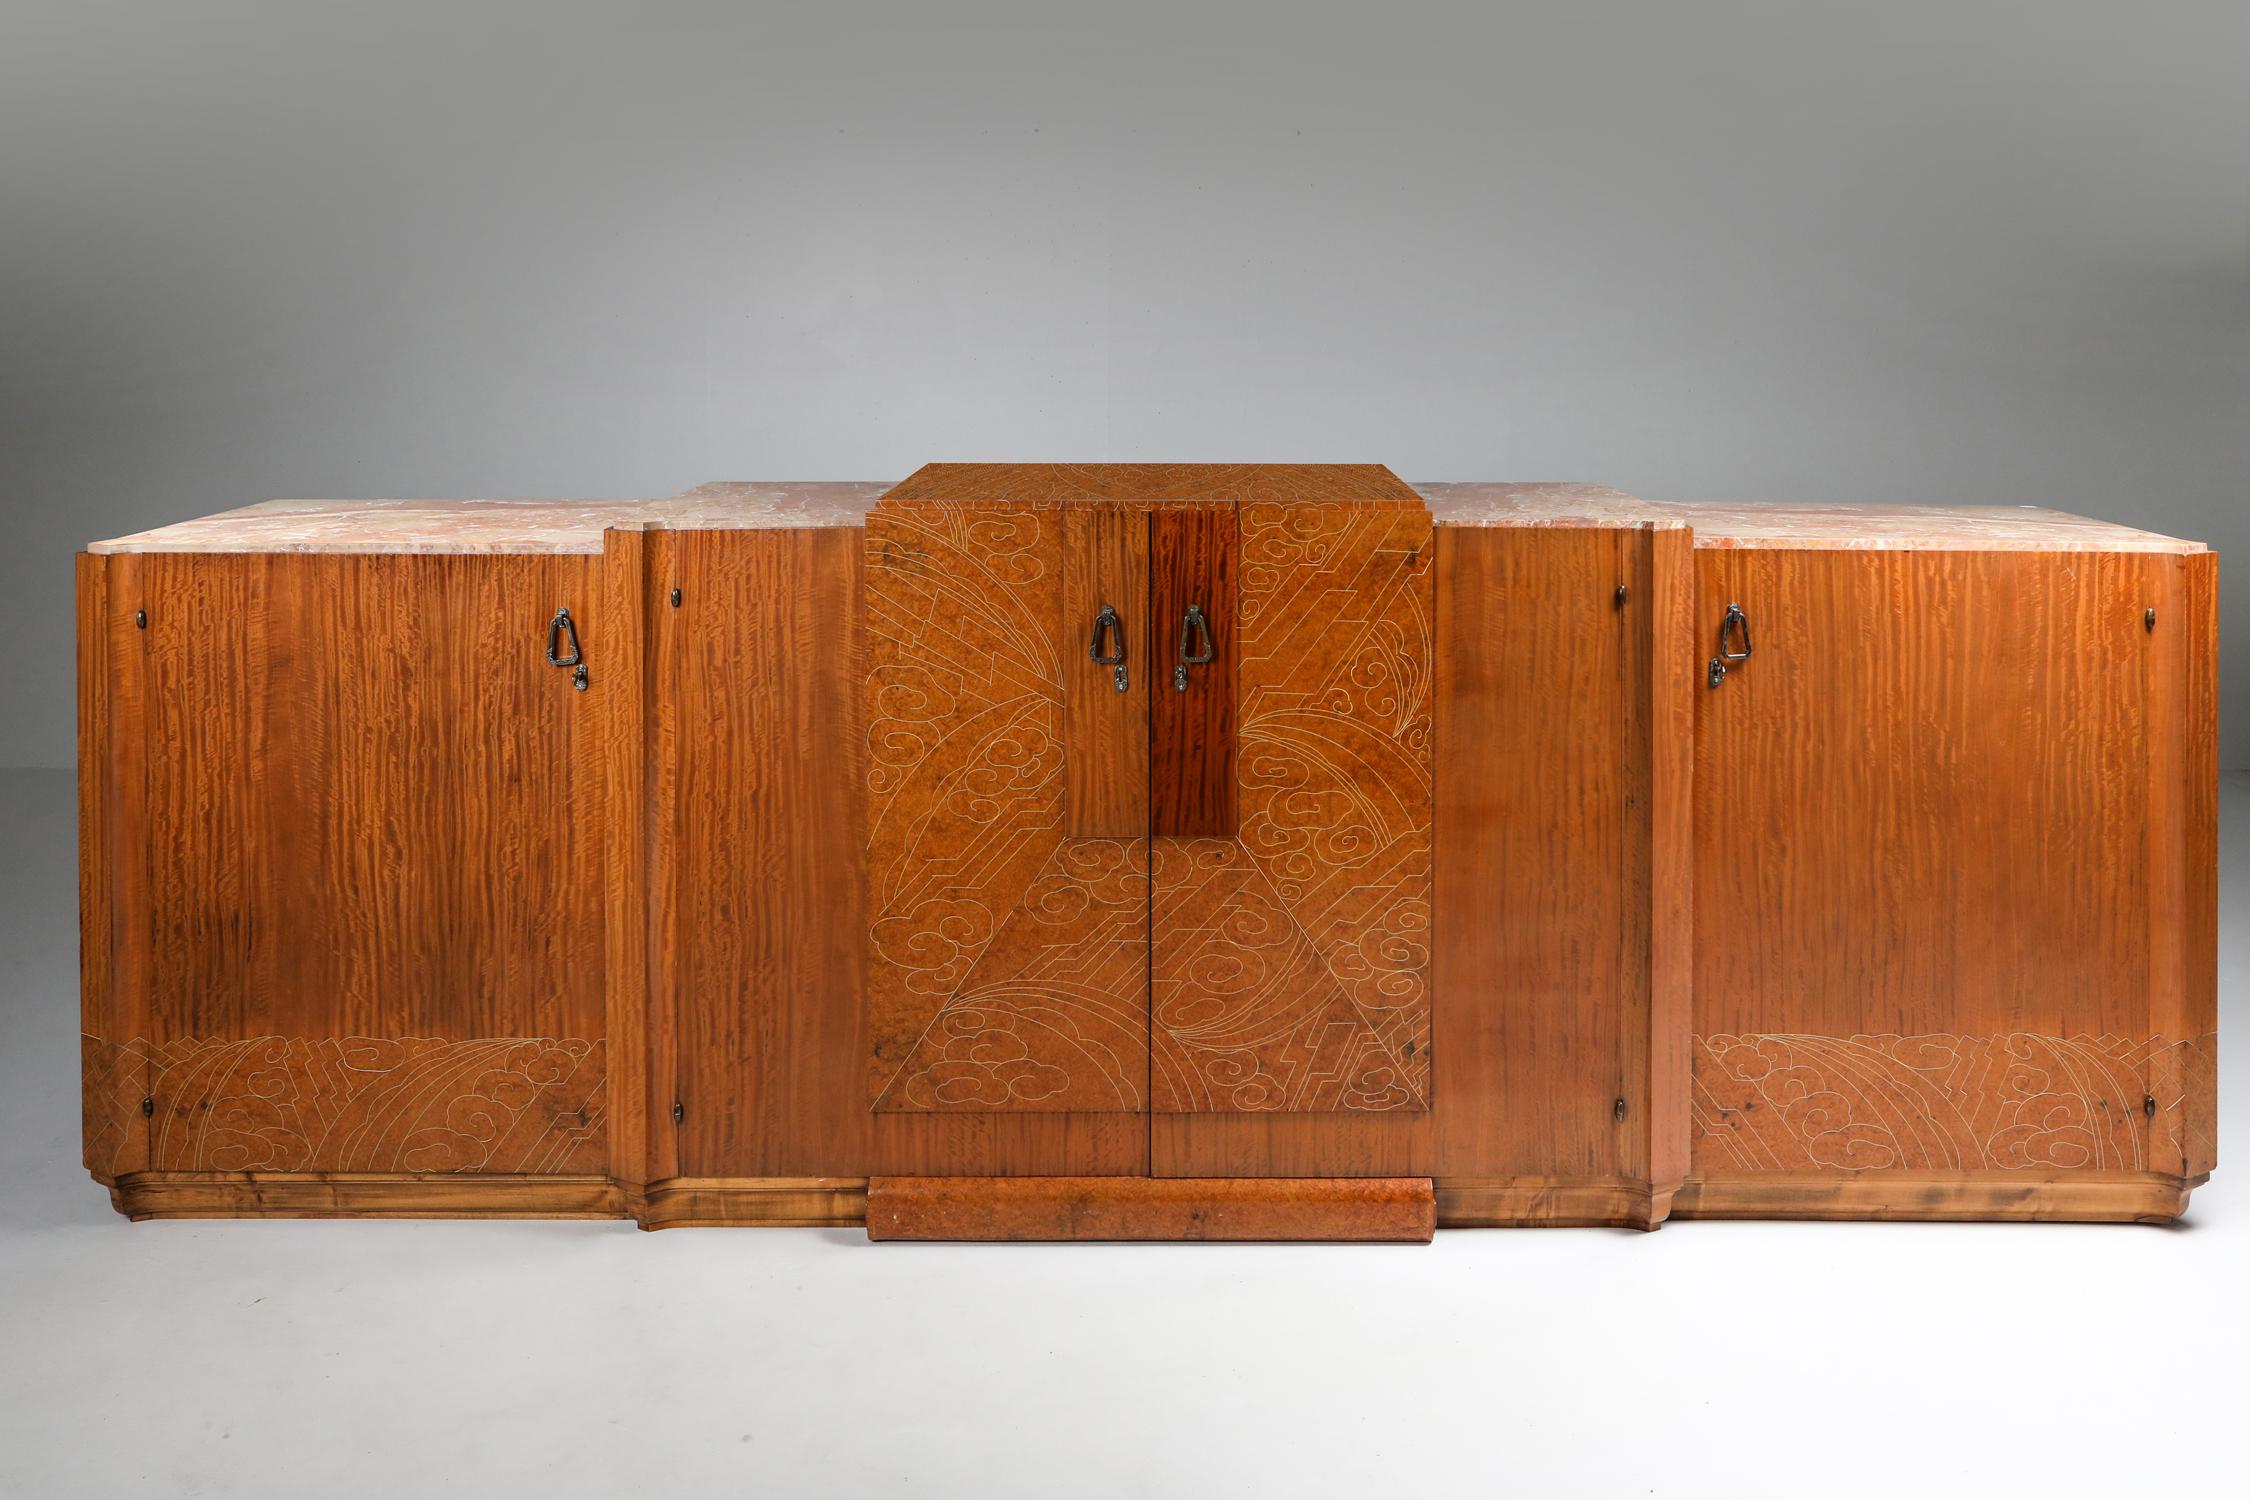 Art Deco sideboard in mahogany, burl, loupe d'amboine and marble, France, 1930s

High-end credenza in a variety of top class materials. The stylish celluloid inlay on the top and door panels display an incredible amount of artistic talent, combined